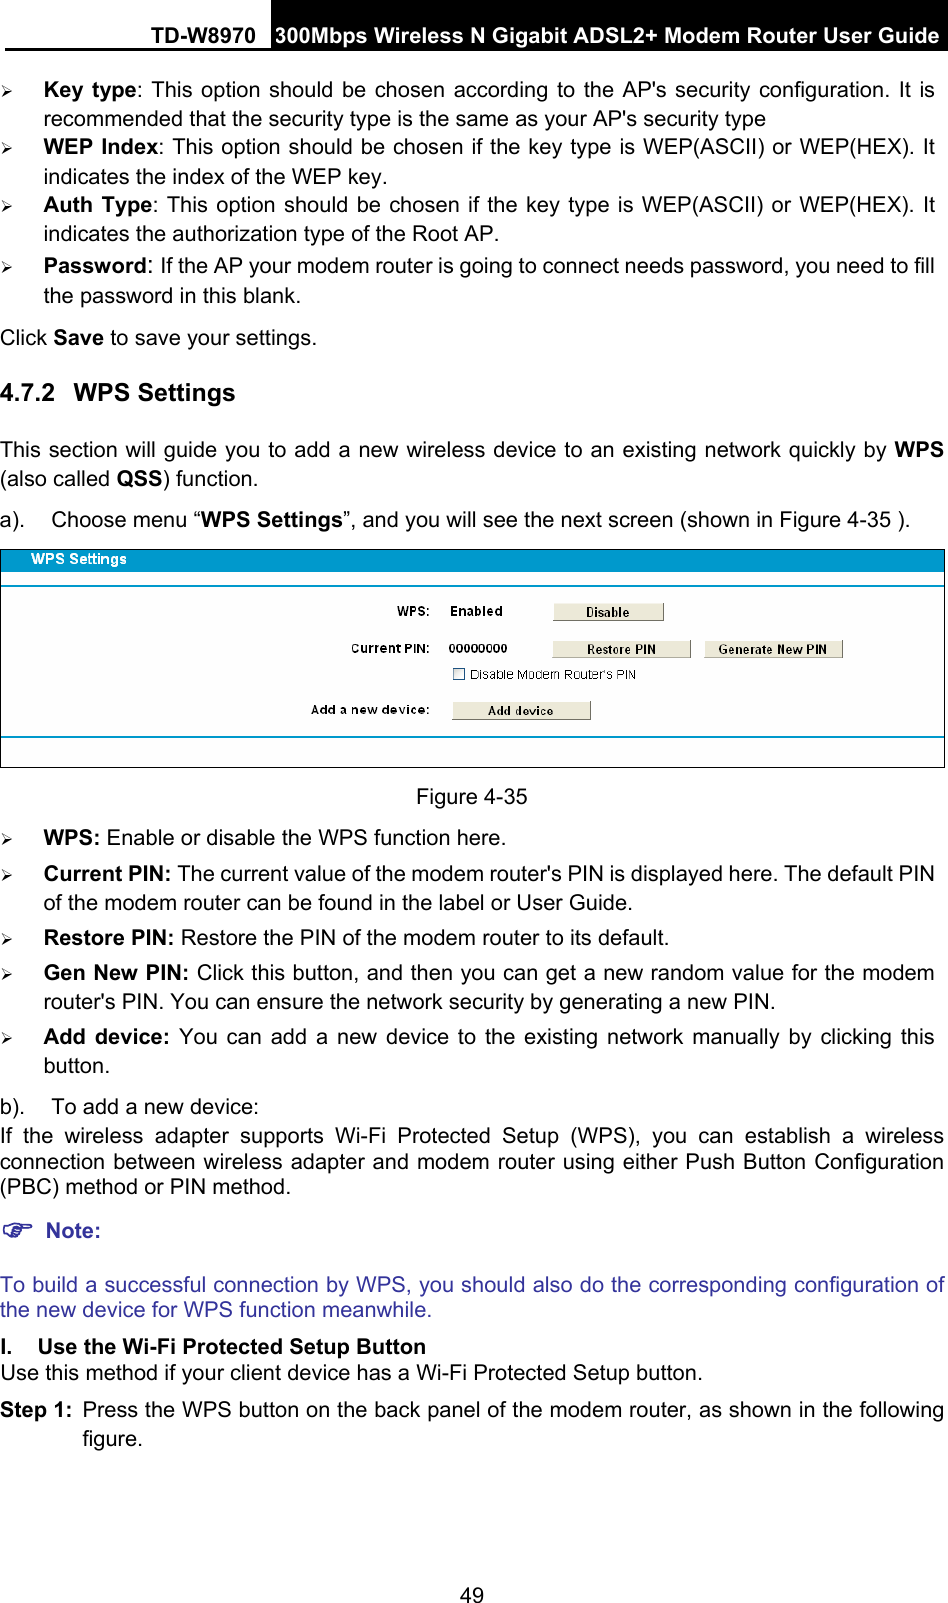 TD-W8970 300Mbps Wireless N Gigabit ADSL2+ Modem Router User Guide 49 ¾ Key type: This option should be chosen according to the AP&apos;s security configuration. It is recommended that the security type is the same as your AP&apos;s security type ¾ WEP Index: This option should be chosen if the key type is WEP(ASCII) or WEP(HEX). It indicates the index of the WEP key. ¾ Auth Type: This option should be chosen if the key type is WEP(ASCII) or WEP(HEX). It indicates the authorization type of the Root AP. ¾ Password: If the AP your modem router is going to connect needs password, you need to fill the password in this blank. Click Save to save your settings. 4.7.2  WPS Settings This section will guide you to add a new wireless device to an existing network quickly by WPS (also called QSS) function. a).  Choose menu “WPS Settings”, and you will see the next screen (shown in Figure 4-35 ).    Figure 4-35 ¾ WPS: Enable or disable the WPS function here.   ¾ Current PIN: The current value of the modem router&apos;s PIN is displayed here. The default PIN of the modem router can be found in the label or User Guide.   ¾ Restore PIN: Restore the PIN of the modem router to its default.   ¾ Gen New PIN: Click this button, and then you can get a new random value for the modem router&apos;s PIN. You can ensure the network security by generating a new PIN. ¾ Add device: You can add a new device to the existing network manually by clicking this button. b).  To add a new device: If the wireless adapter supports Wi-Fi Protected Setup (WPS), you can establish a wireless connection between wireless adapter and modem router using either Push Button Configuration (PBC) method or PIN method. ) Note: To build a successful connection by WPS, you should also do the corresponding configuration of the new device for WPS function meanwhile. I.  Use the Wi-Fi Protected Setup Button Use this method if your client device has a Wi-Fi Protected Setup button. Step 1:  Press the WPS button on the back panel of the modem router, as shown in the following figure. 